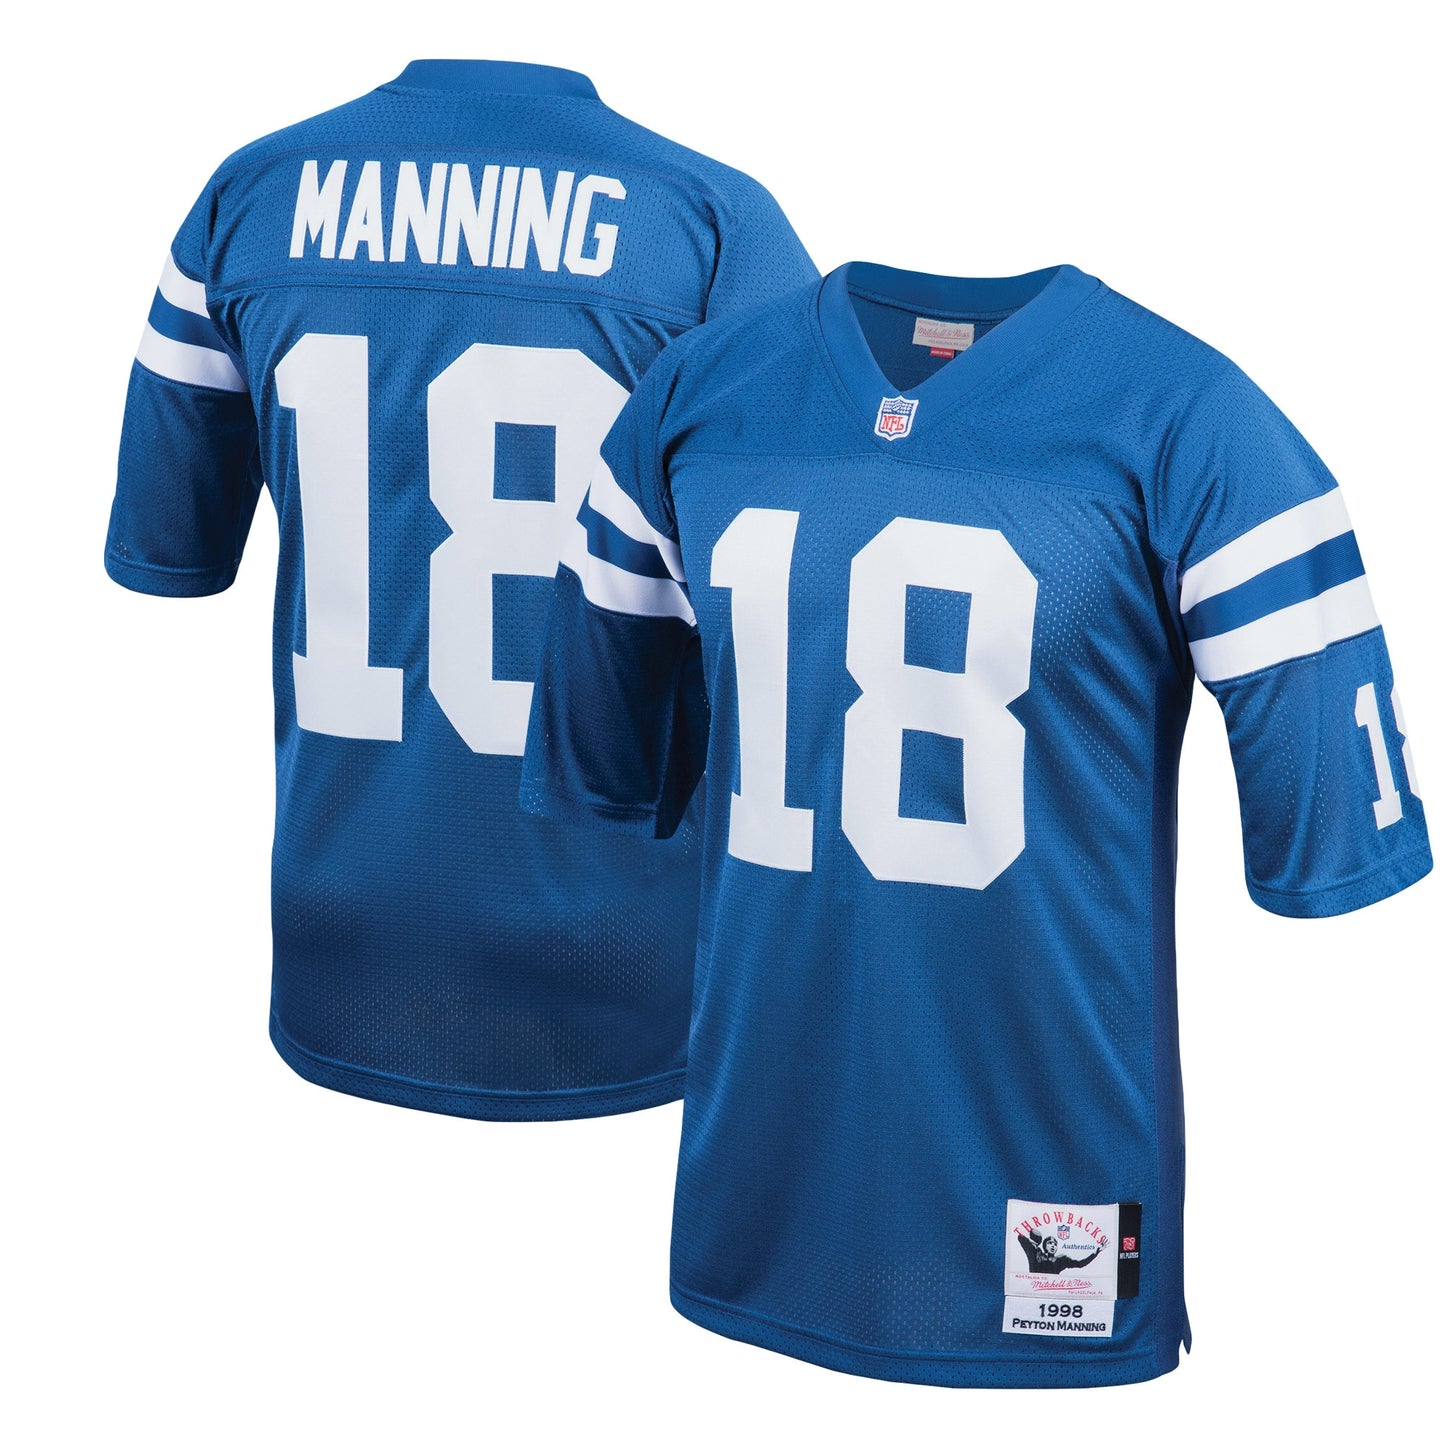 Peyton Manning Indianapolis Colts Mitchell & Ness 1998 Authentic Throwback Retired Player Jersey - Royal